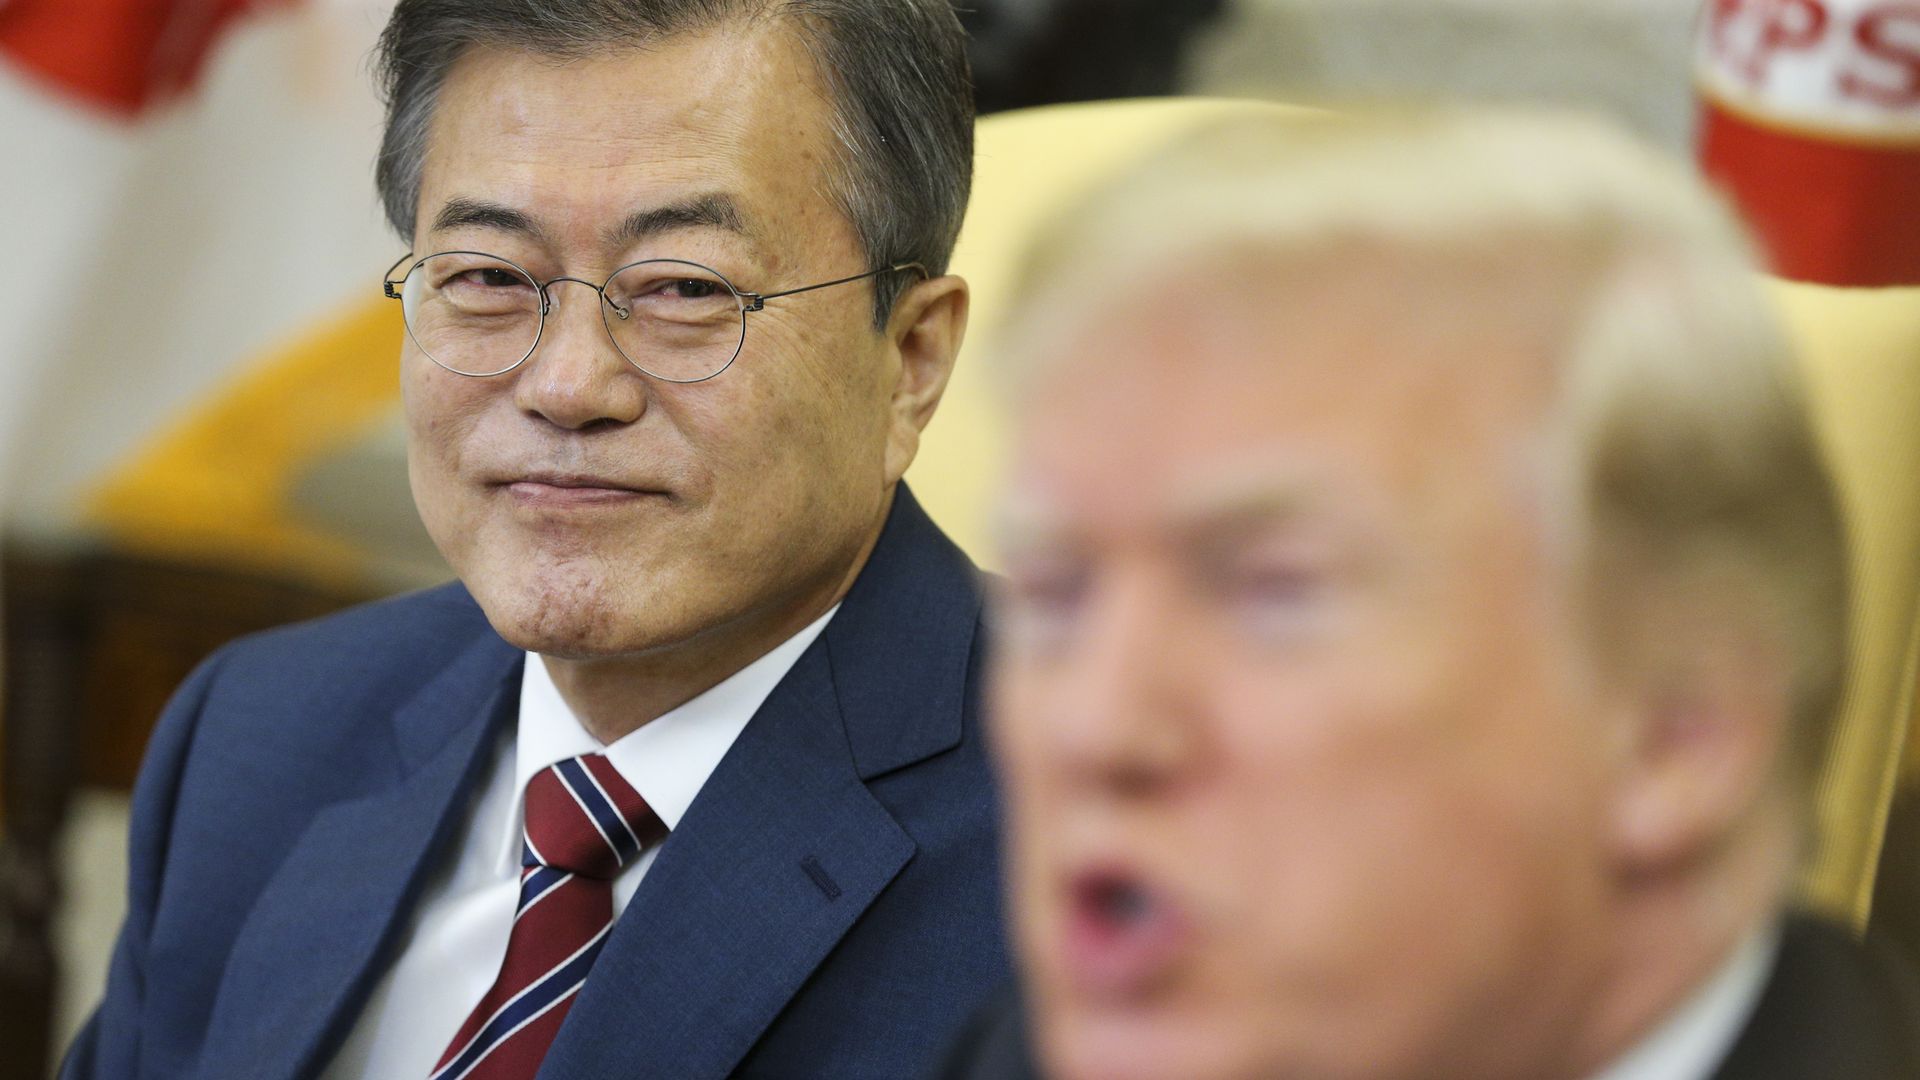 Moon Jae-in sits looking sideways at Trump, who is blurry in the foreground while speaking.